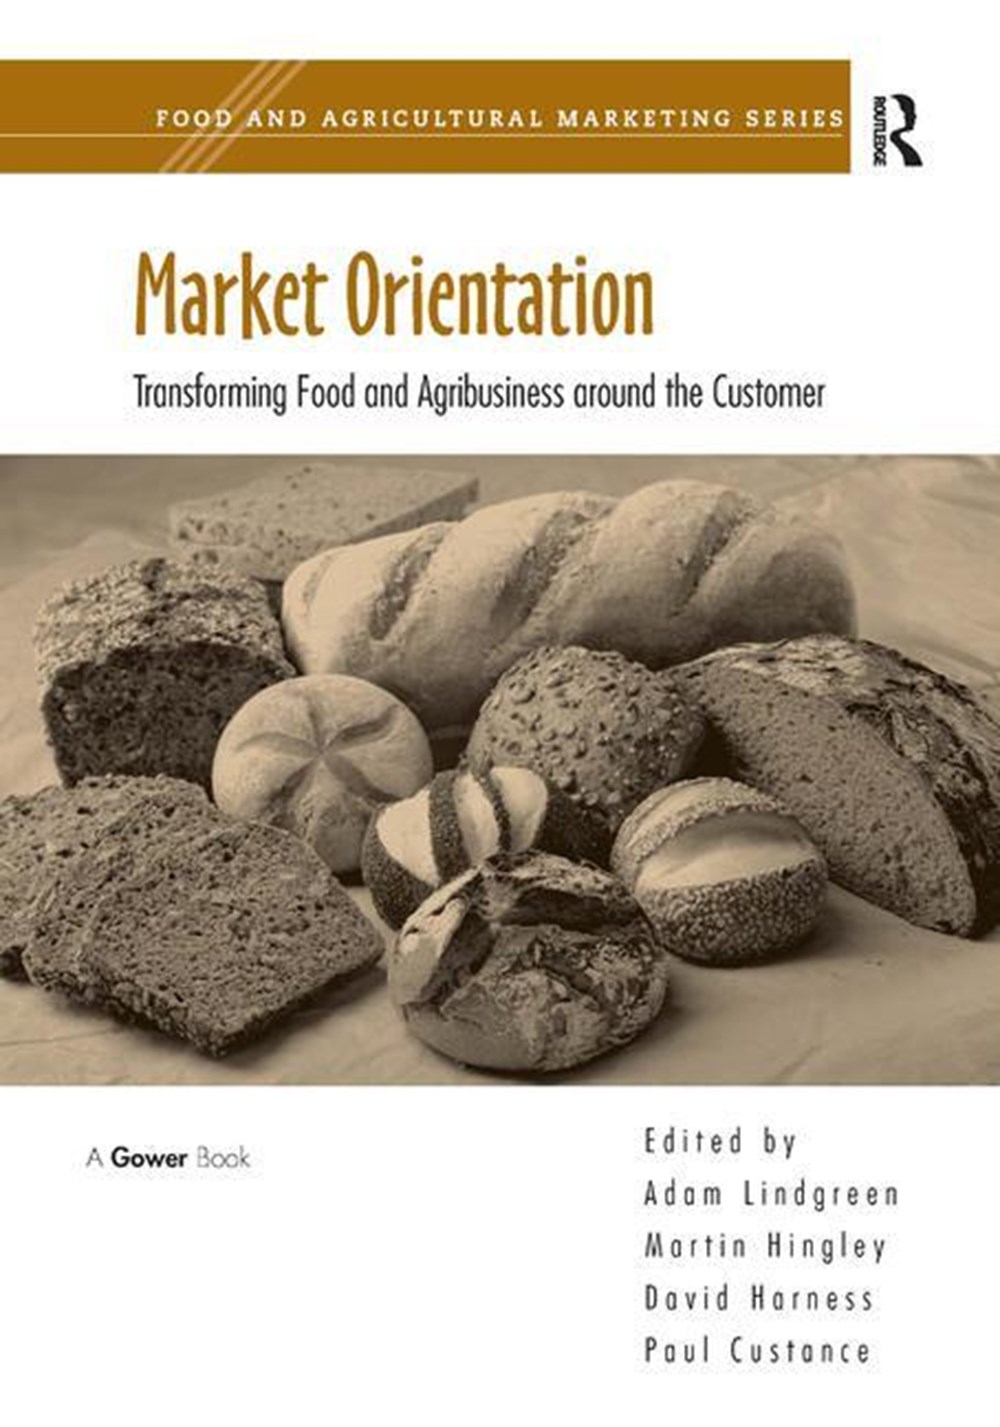 Market Orientation: Transforming Food and Agribusiness Around the Customer